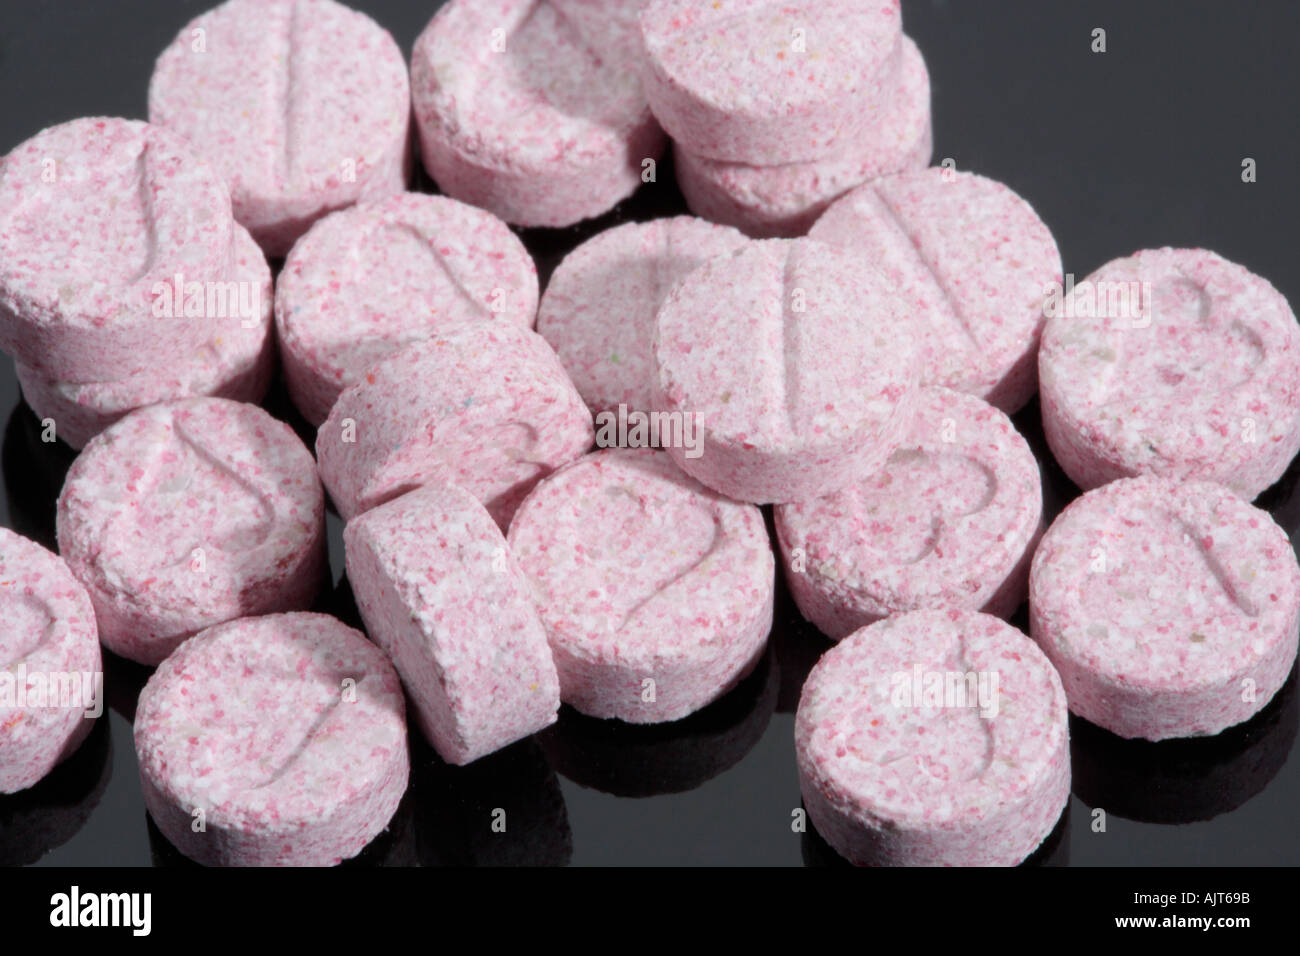 Pink coloured Ecstasy tablet illegal drugs Pills Stock Photo